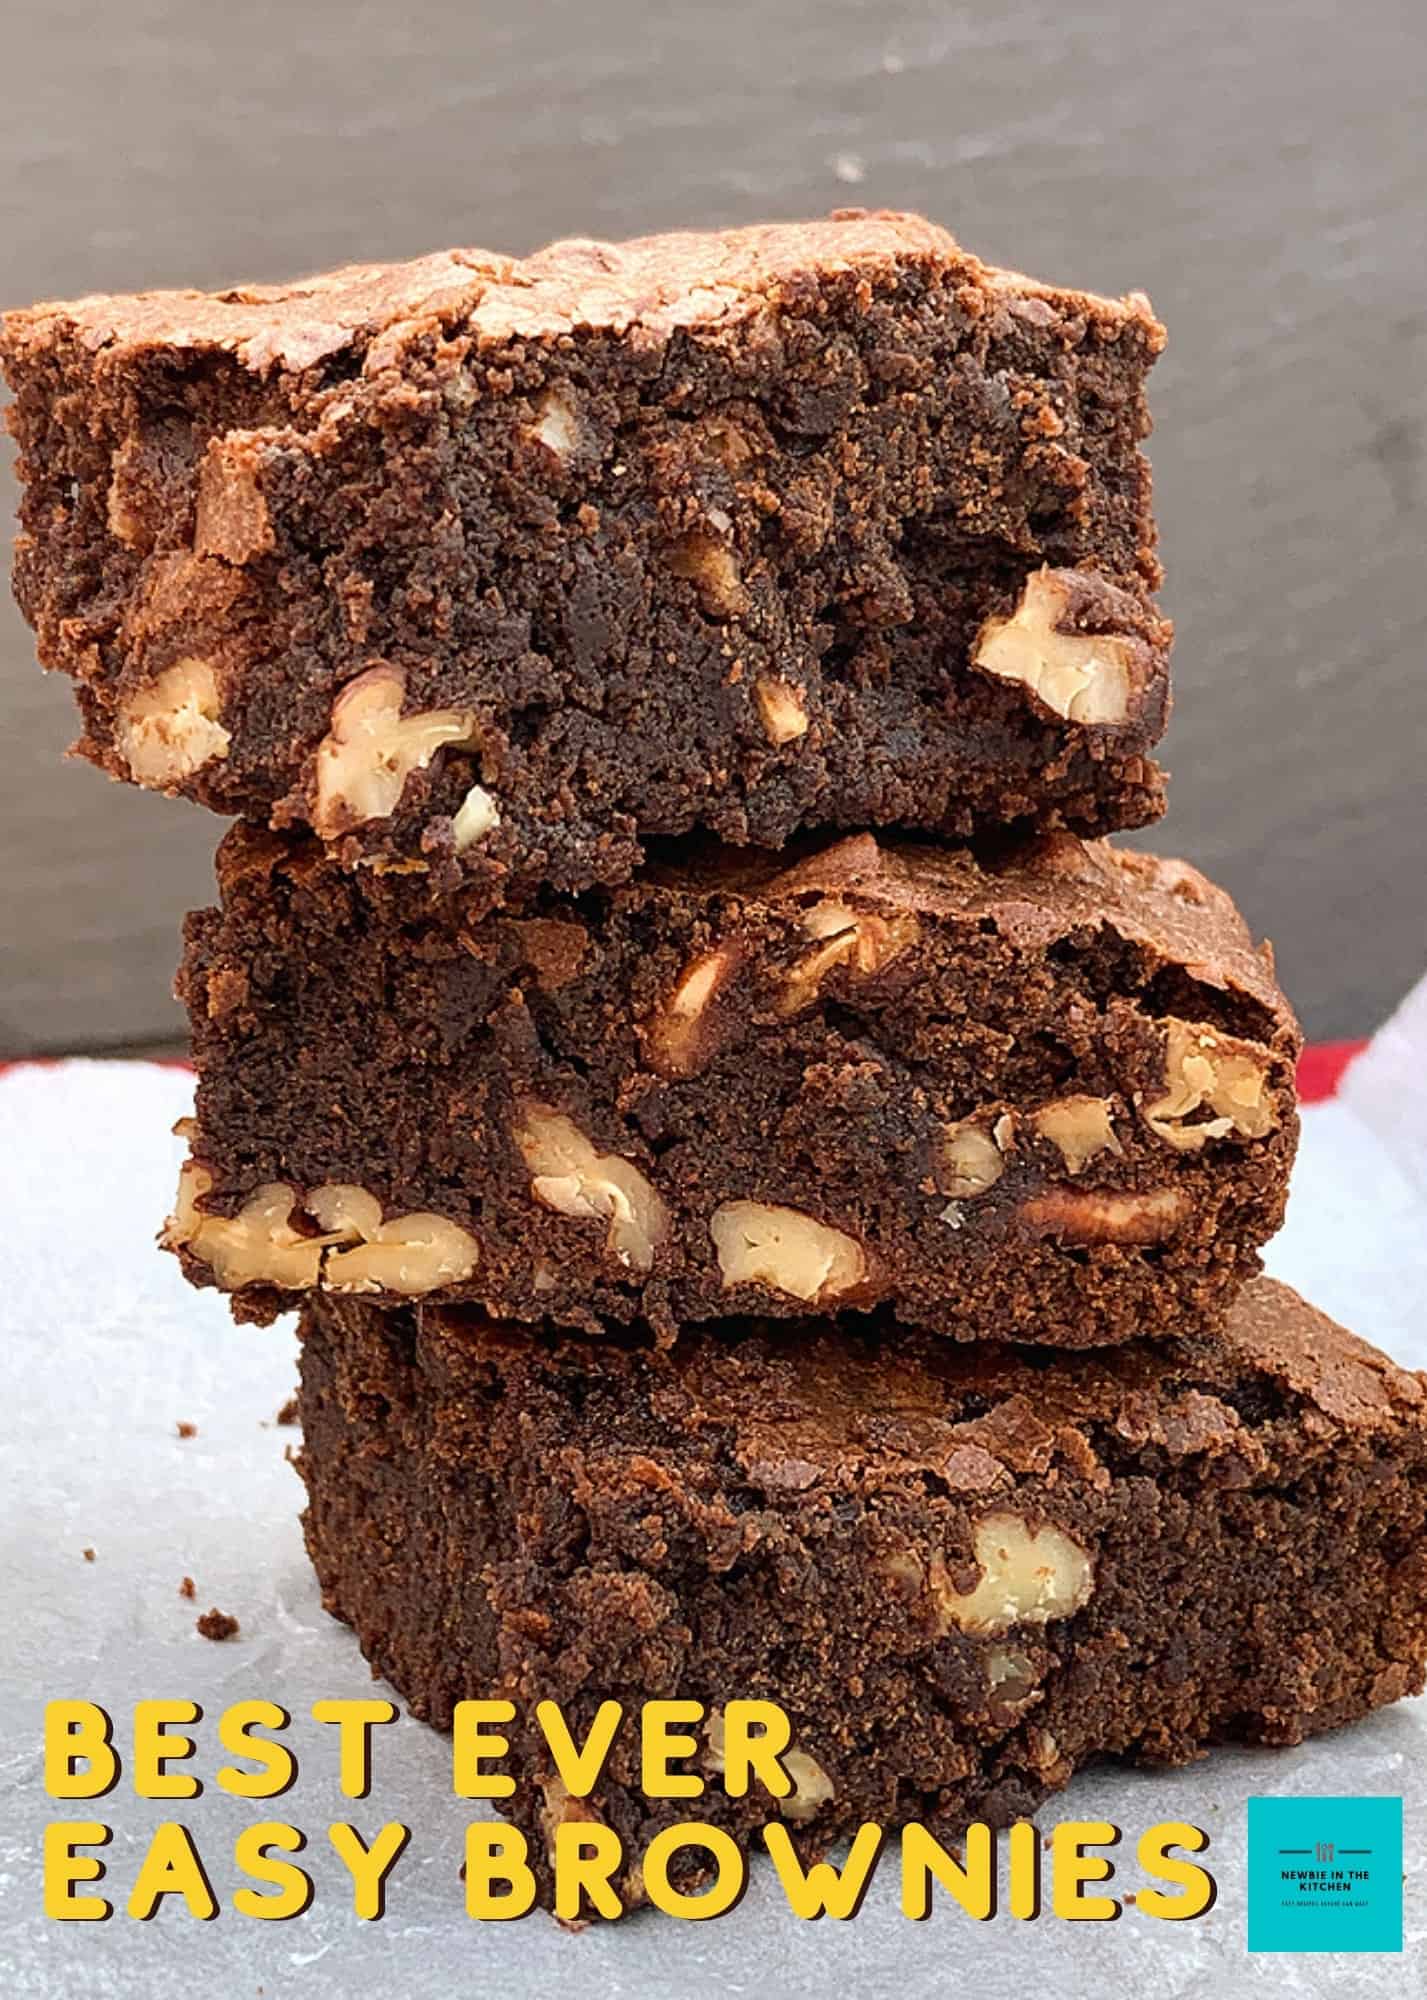 Best Ever Easy Brownie Recipe. This Easy Brownie Recipe is a basic recipe to give you brownies that are chewy & soft with a classic crispy outer, loaded with chocolate. Delicious rich chocolate dessert or snack.The best ever brownie recipe!